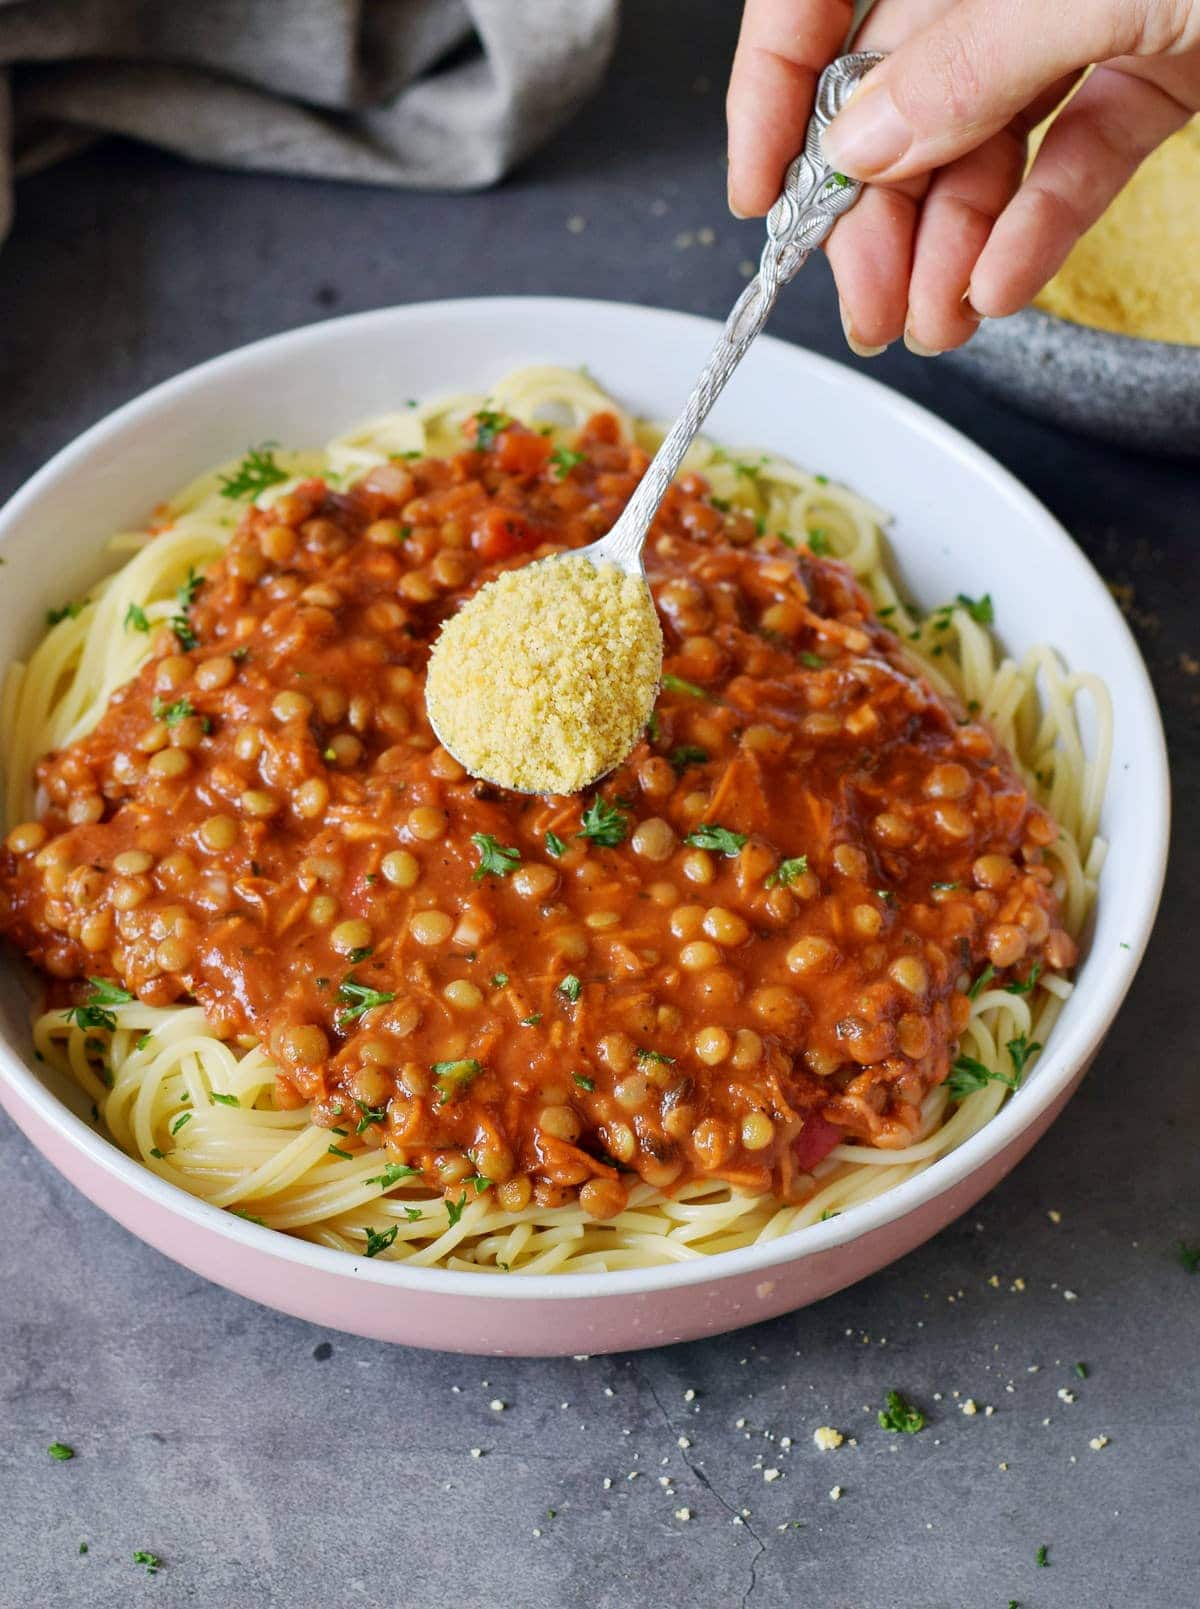 lentil bolognese with hand holding spoon containing parm